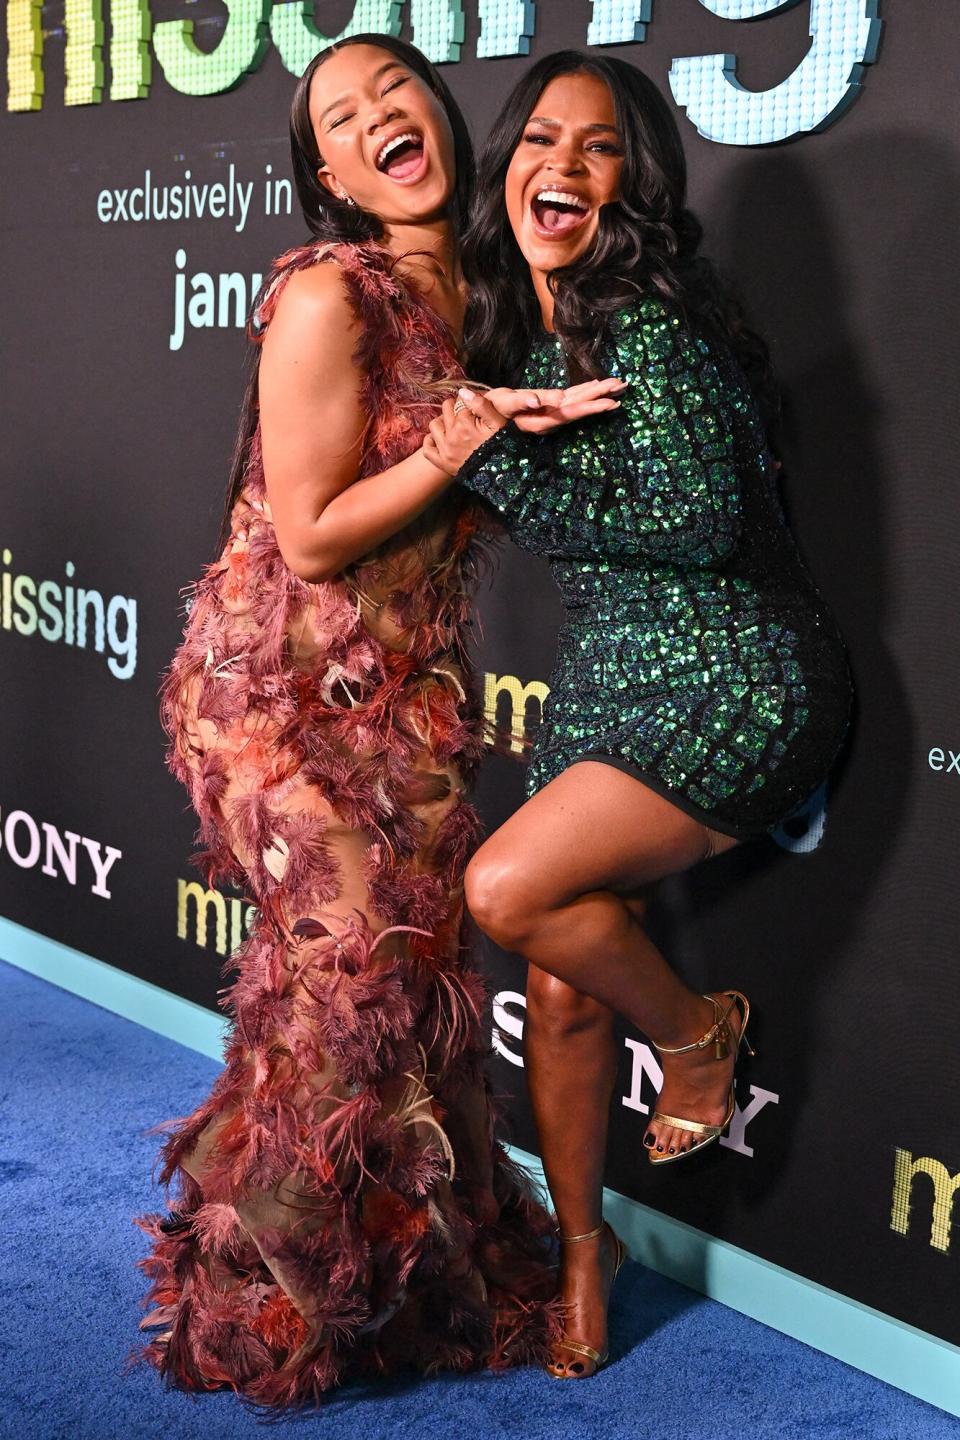 US actresses Storm Reid (L) and Nia Long (R) attend the Los Angeles premiere of "Missing" at the Alamo Drafthouse in Los Angeles, January 12, 2023